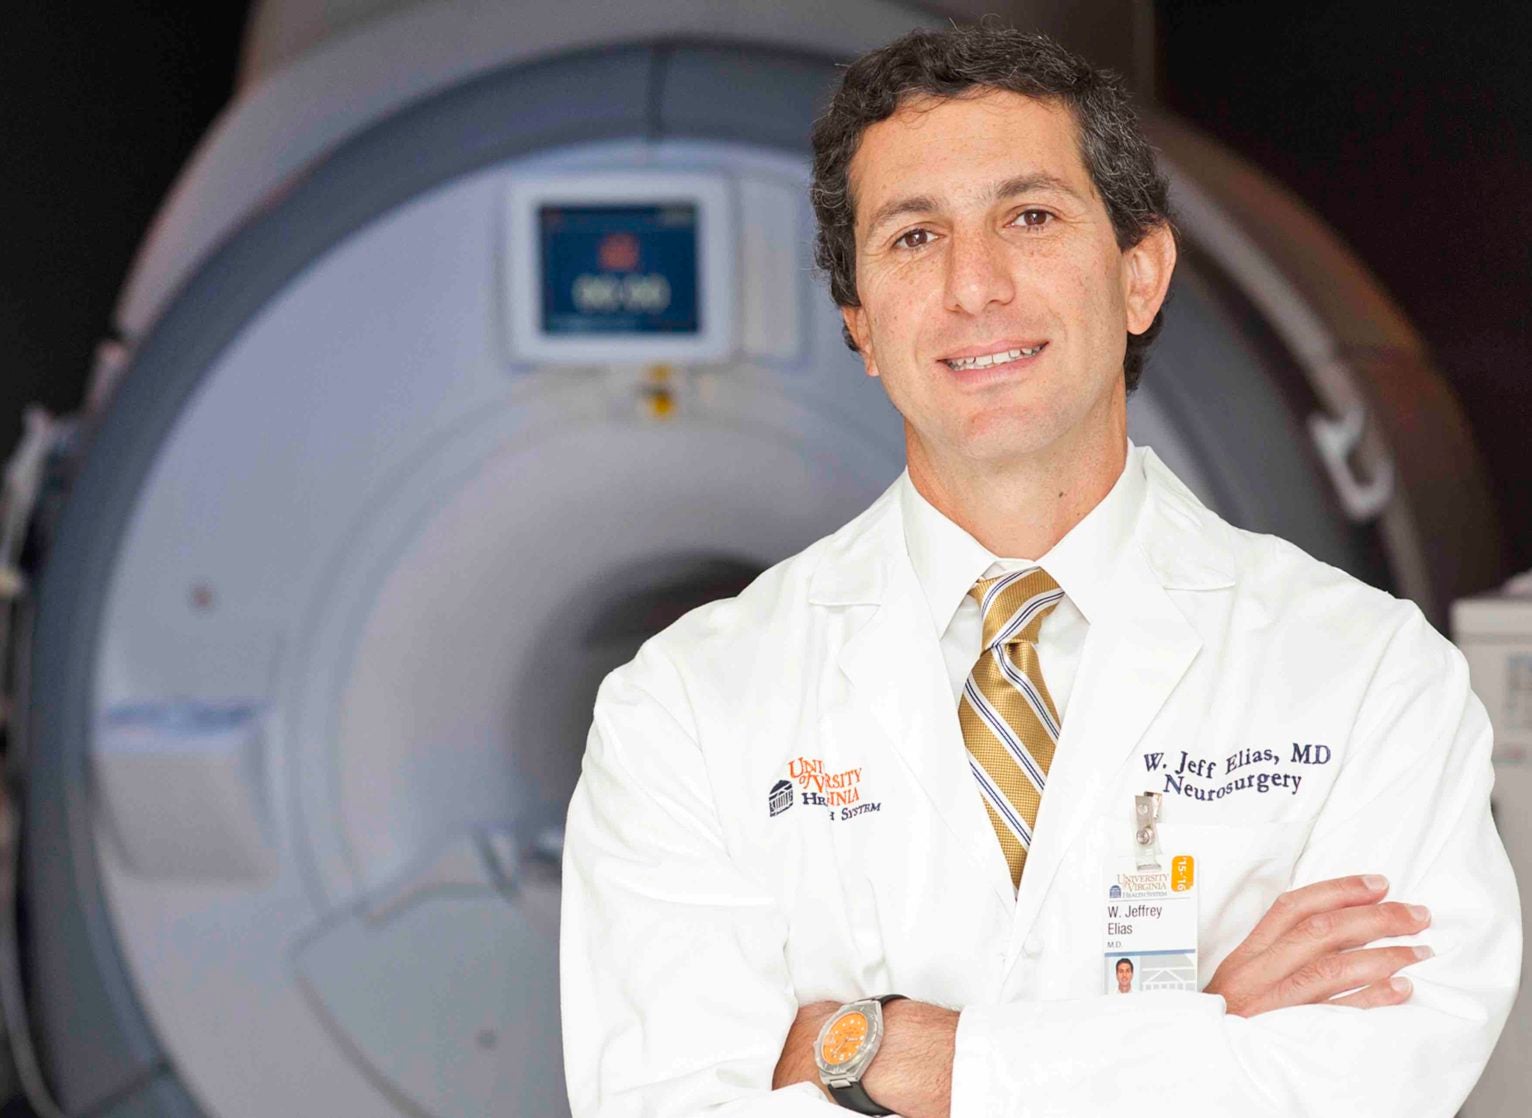 Jeff Elias, MD, pioneered the use of focused ultrasound for the treatment of essential tremor and Parkinson's disease.